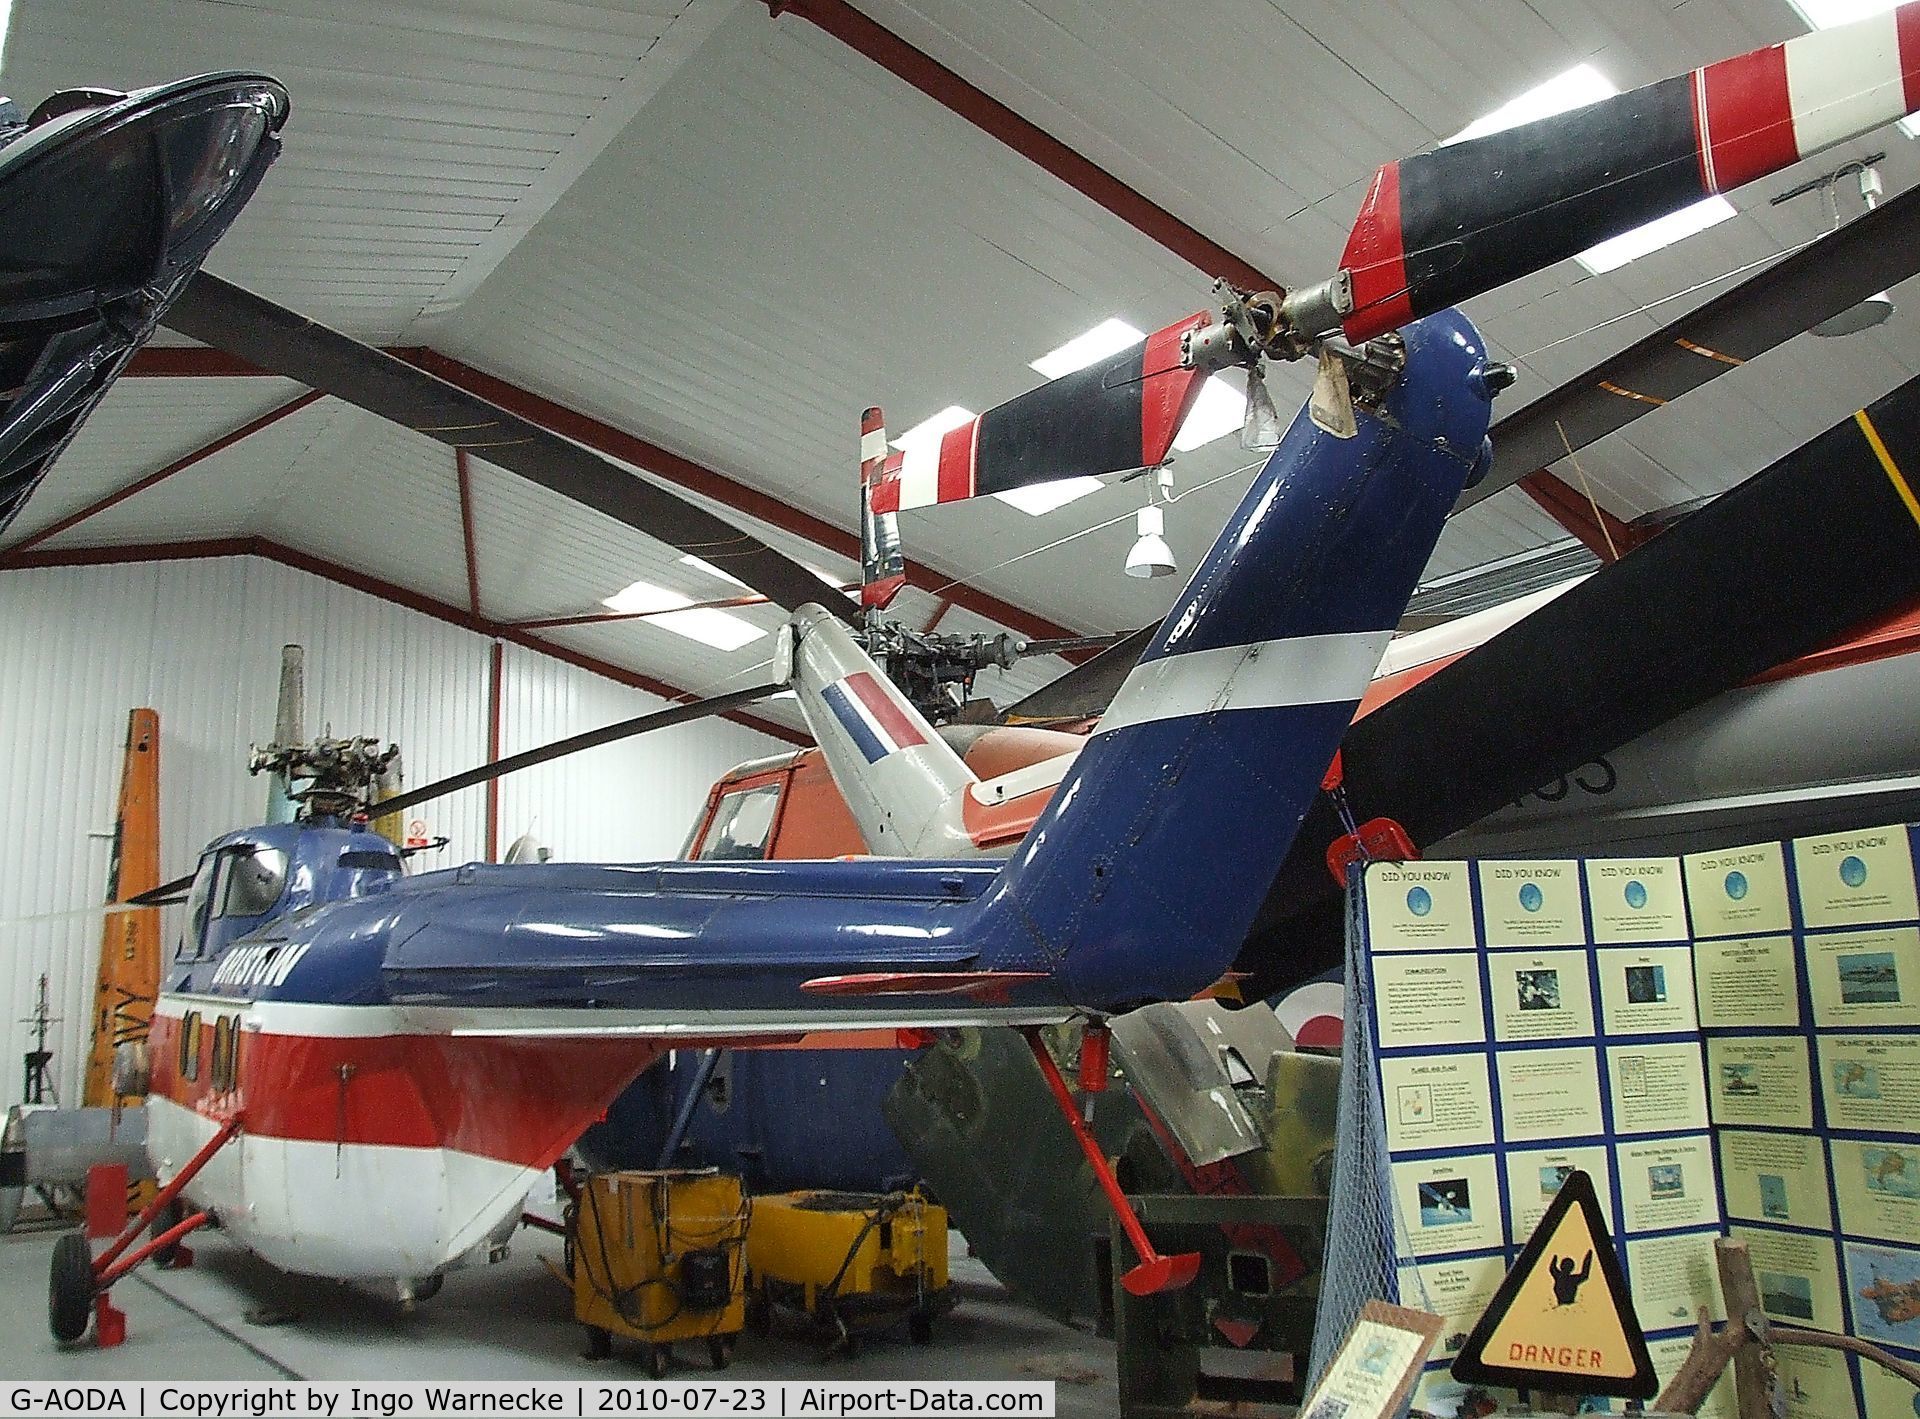 G-AODA, 1955 Westland S.55 Series 3 Whirlwind C/N WA113, Westland S-55 Whirlwind Srs.3 at the Helicopter Museum, Weston-super-Mare